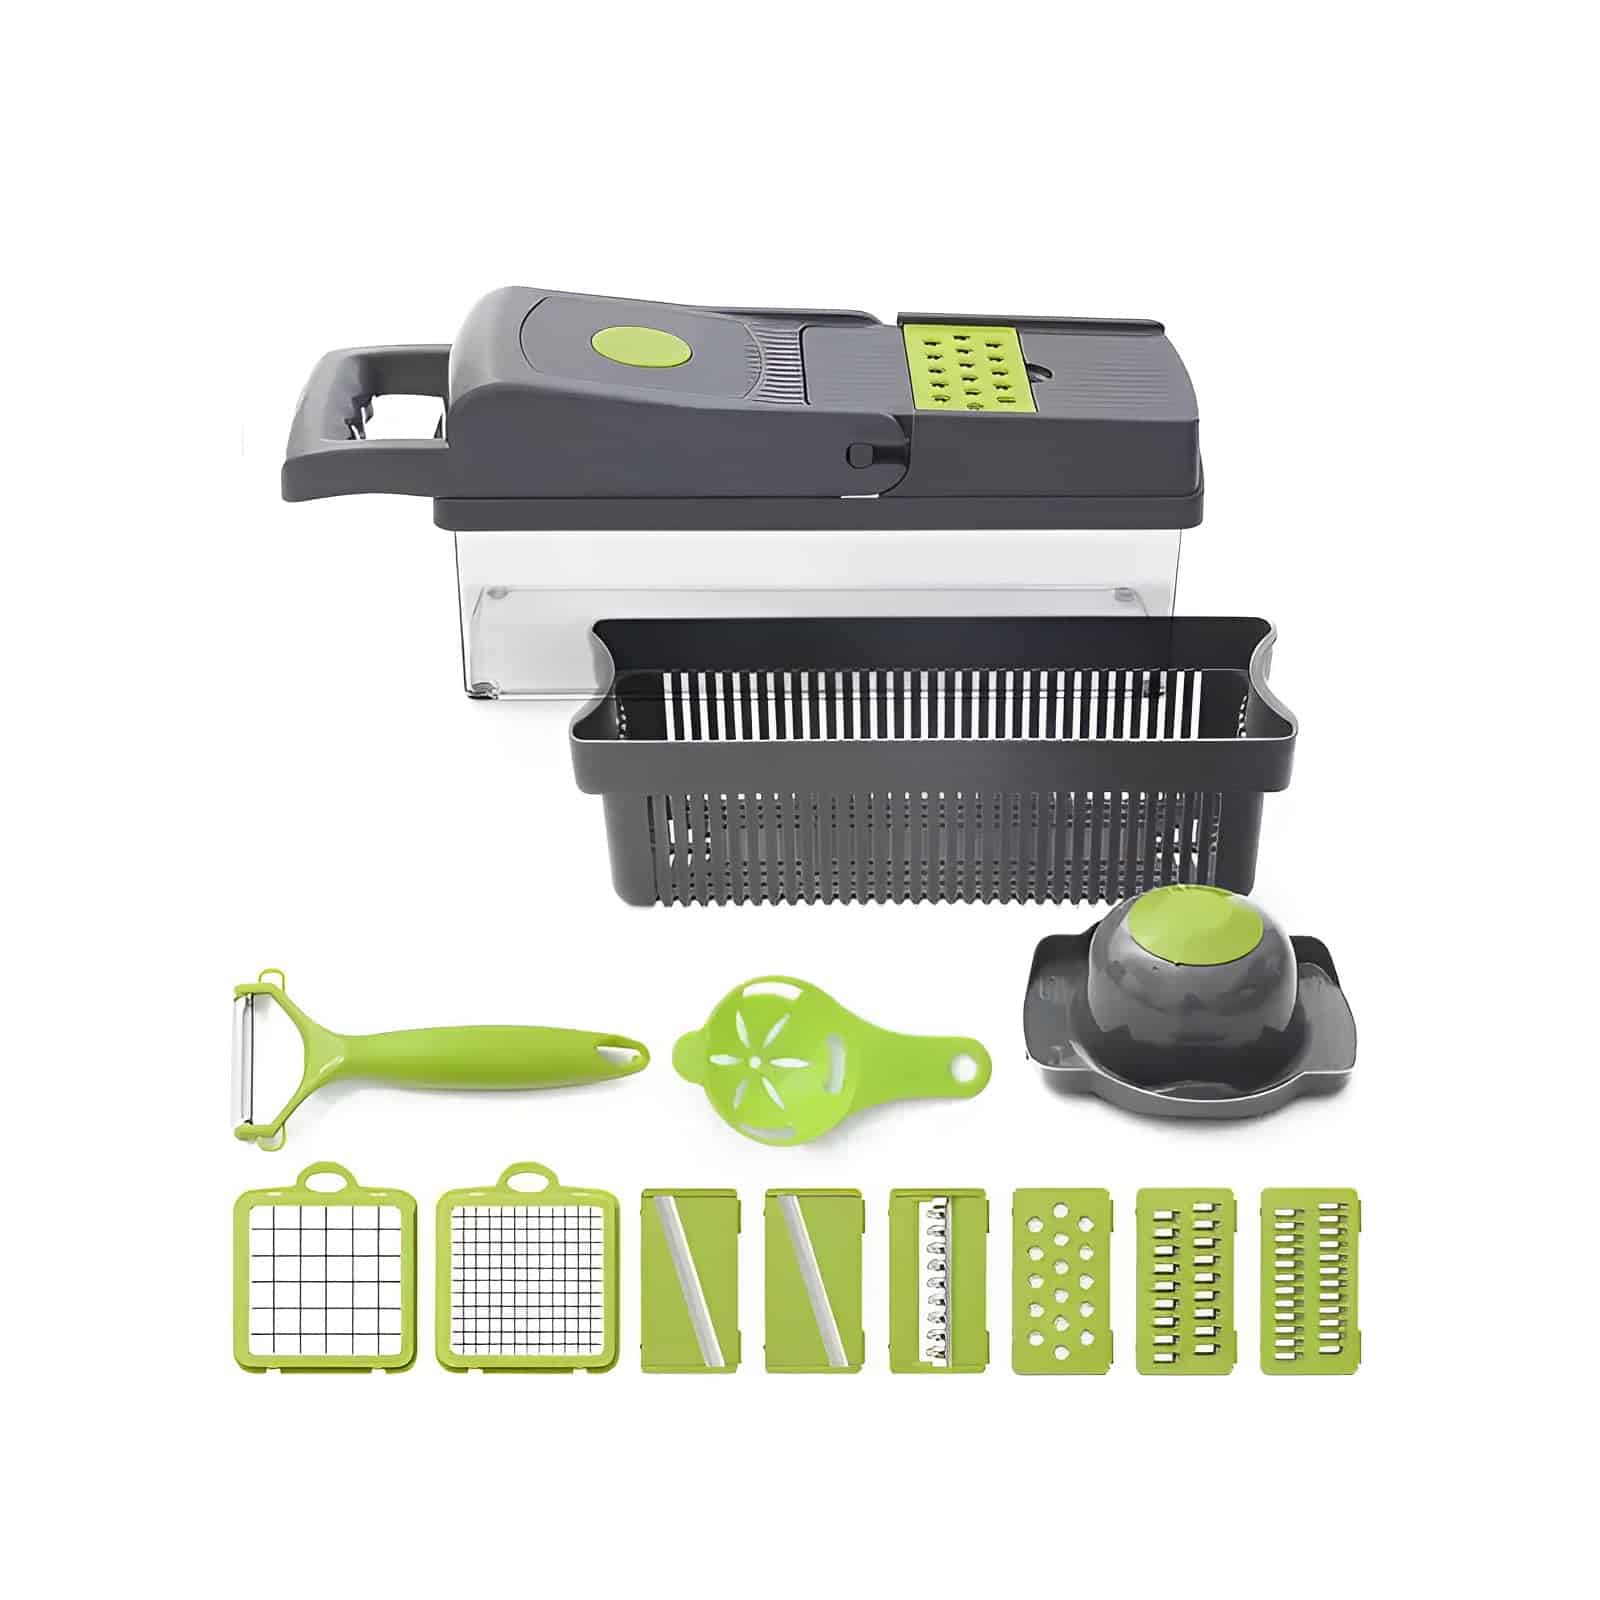 Chop, Dice, Slice or Grate with the most sought after 10-in-1 Vegetable Slicer.